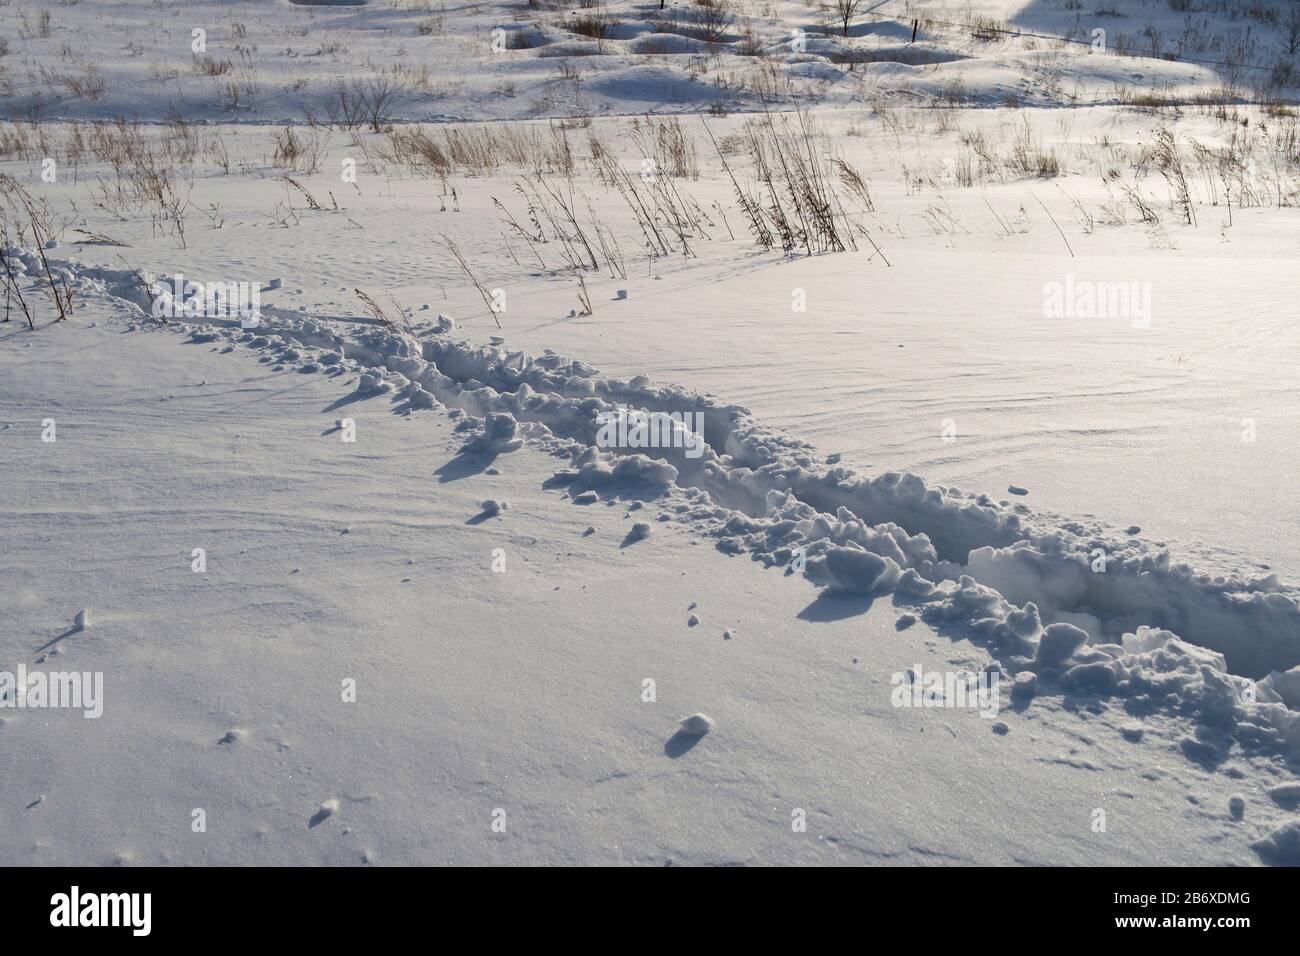 The snowy path in the field. The snowy path. Stock Photo